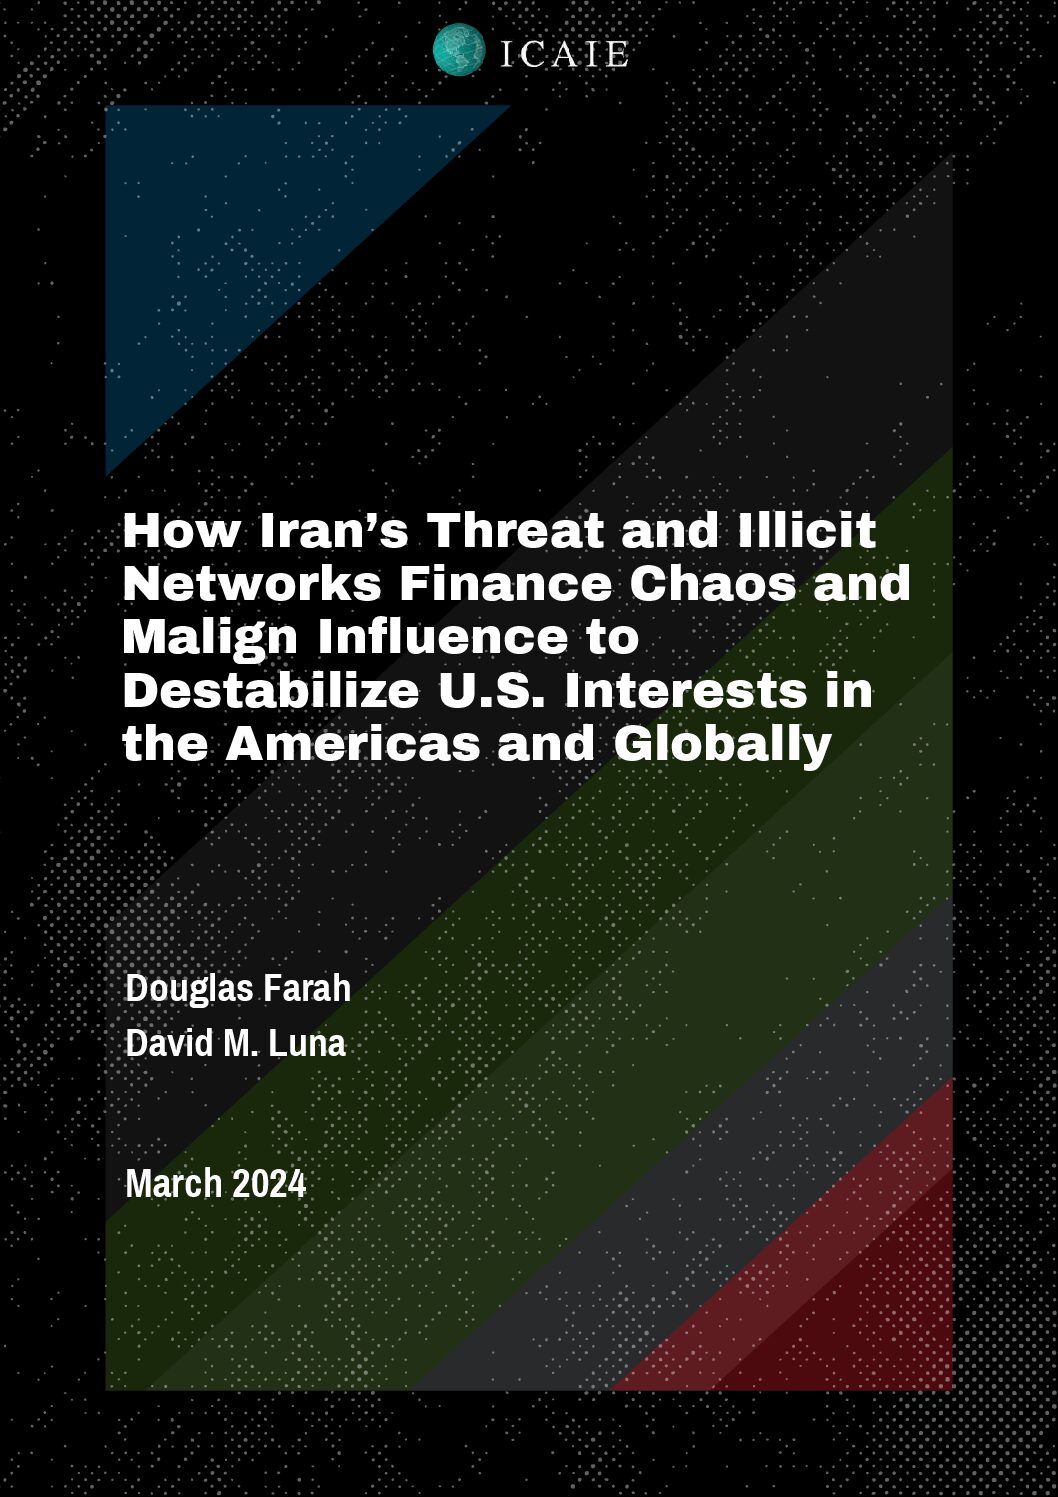 ICAIE Iran Threat Networks Report March 2023.pdf FINAL